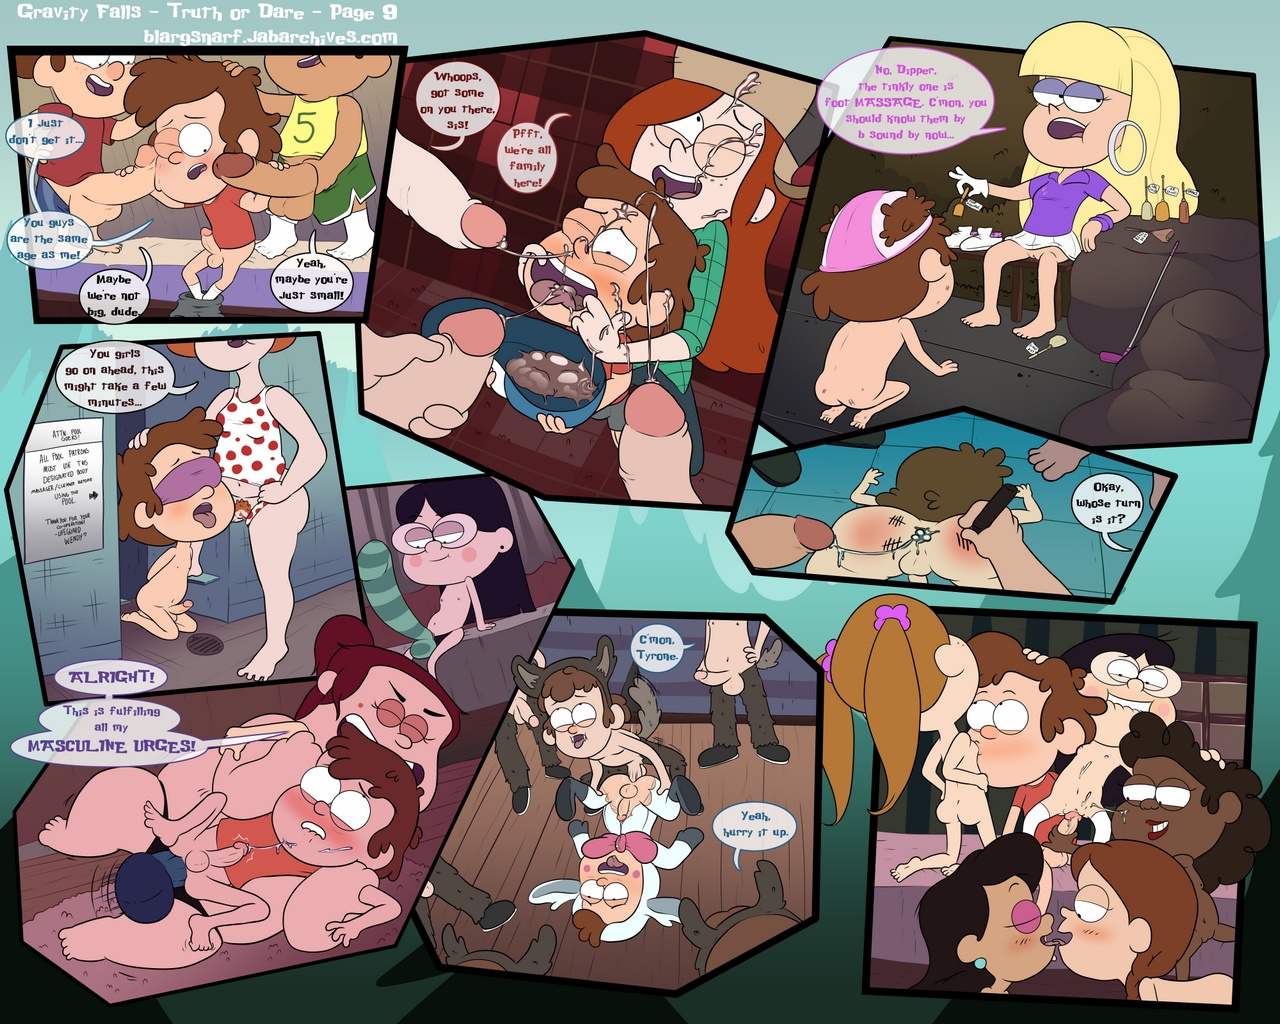 1280px x 1024px - Gravity-Falls-Truth-Or-Dare-010 - Gay Furry Comics